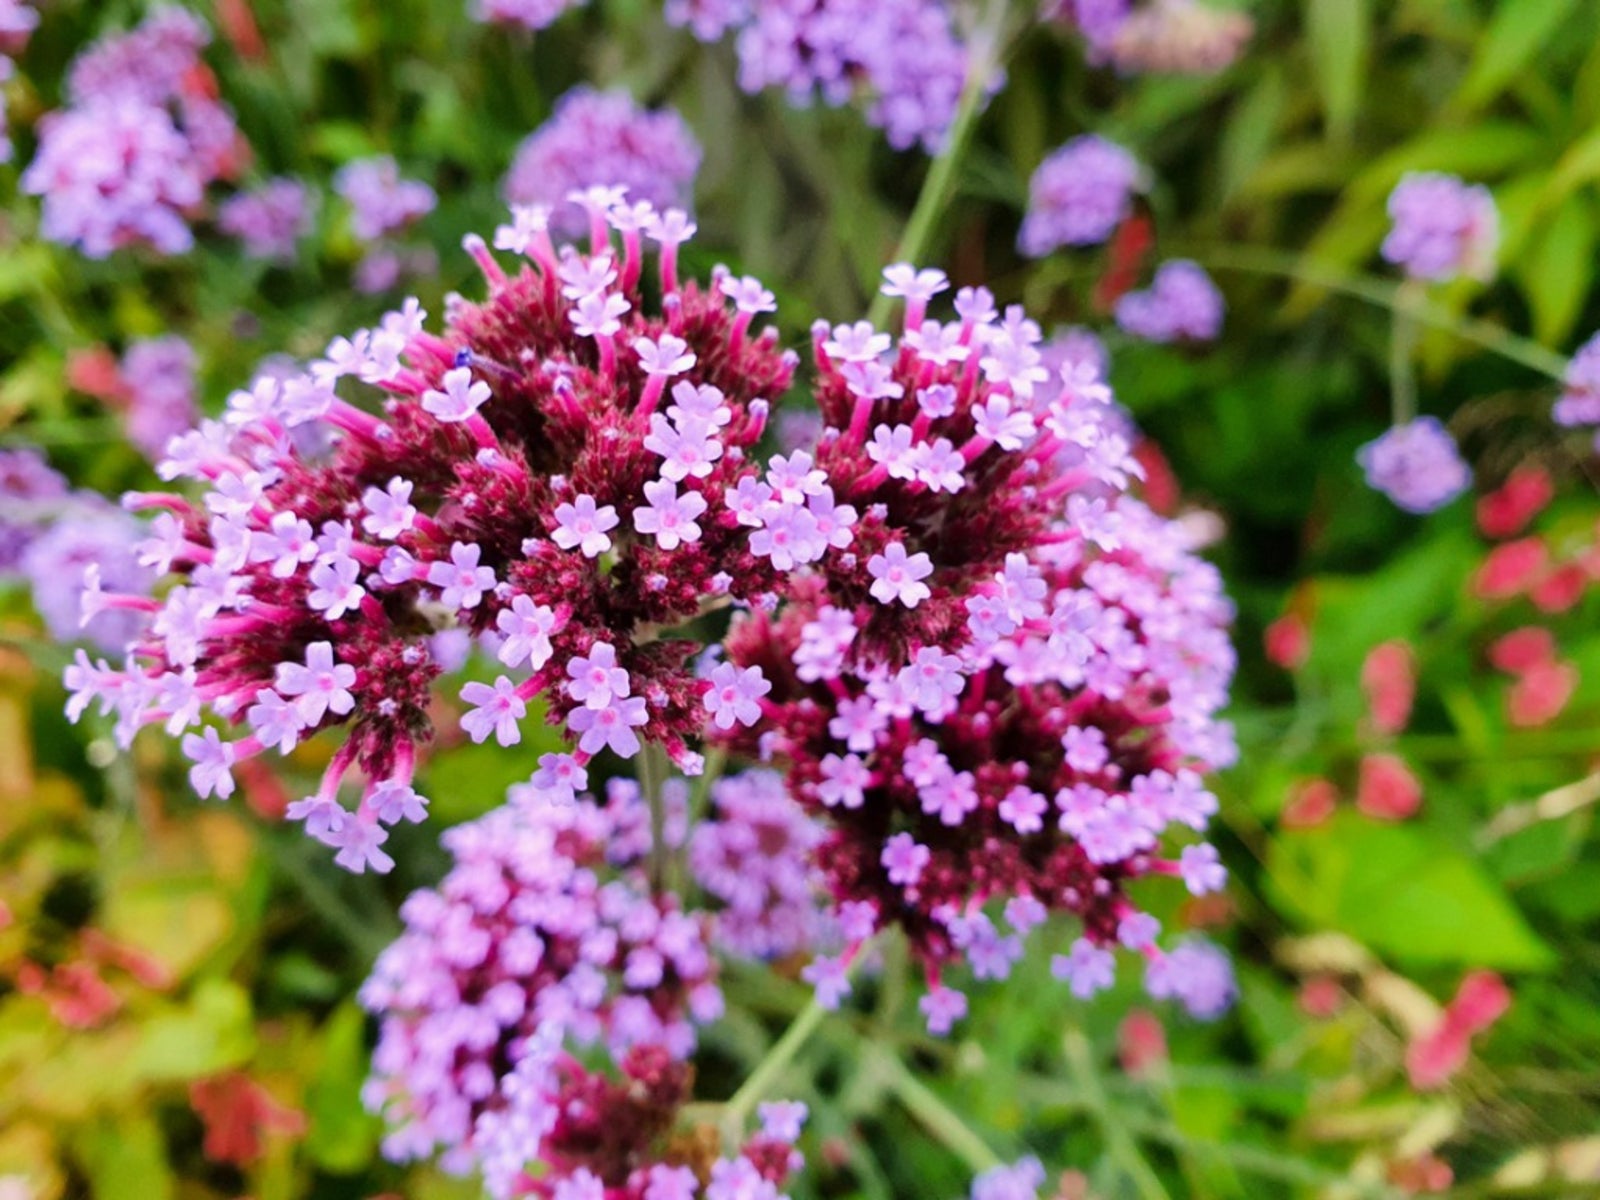 planting verbena flower - verbena growing conditions and care